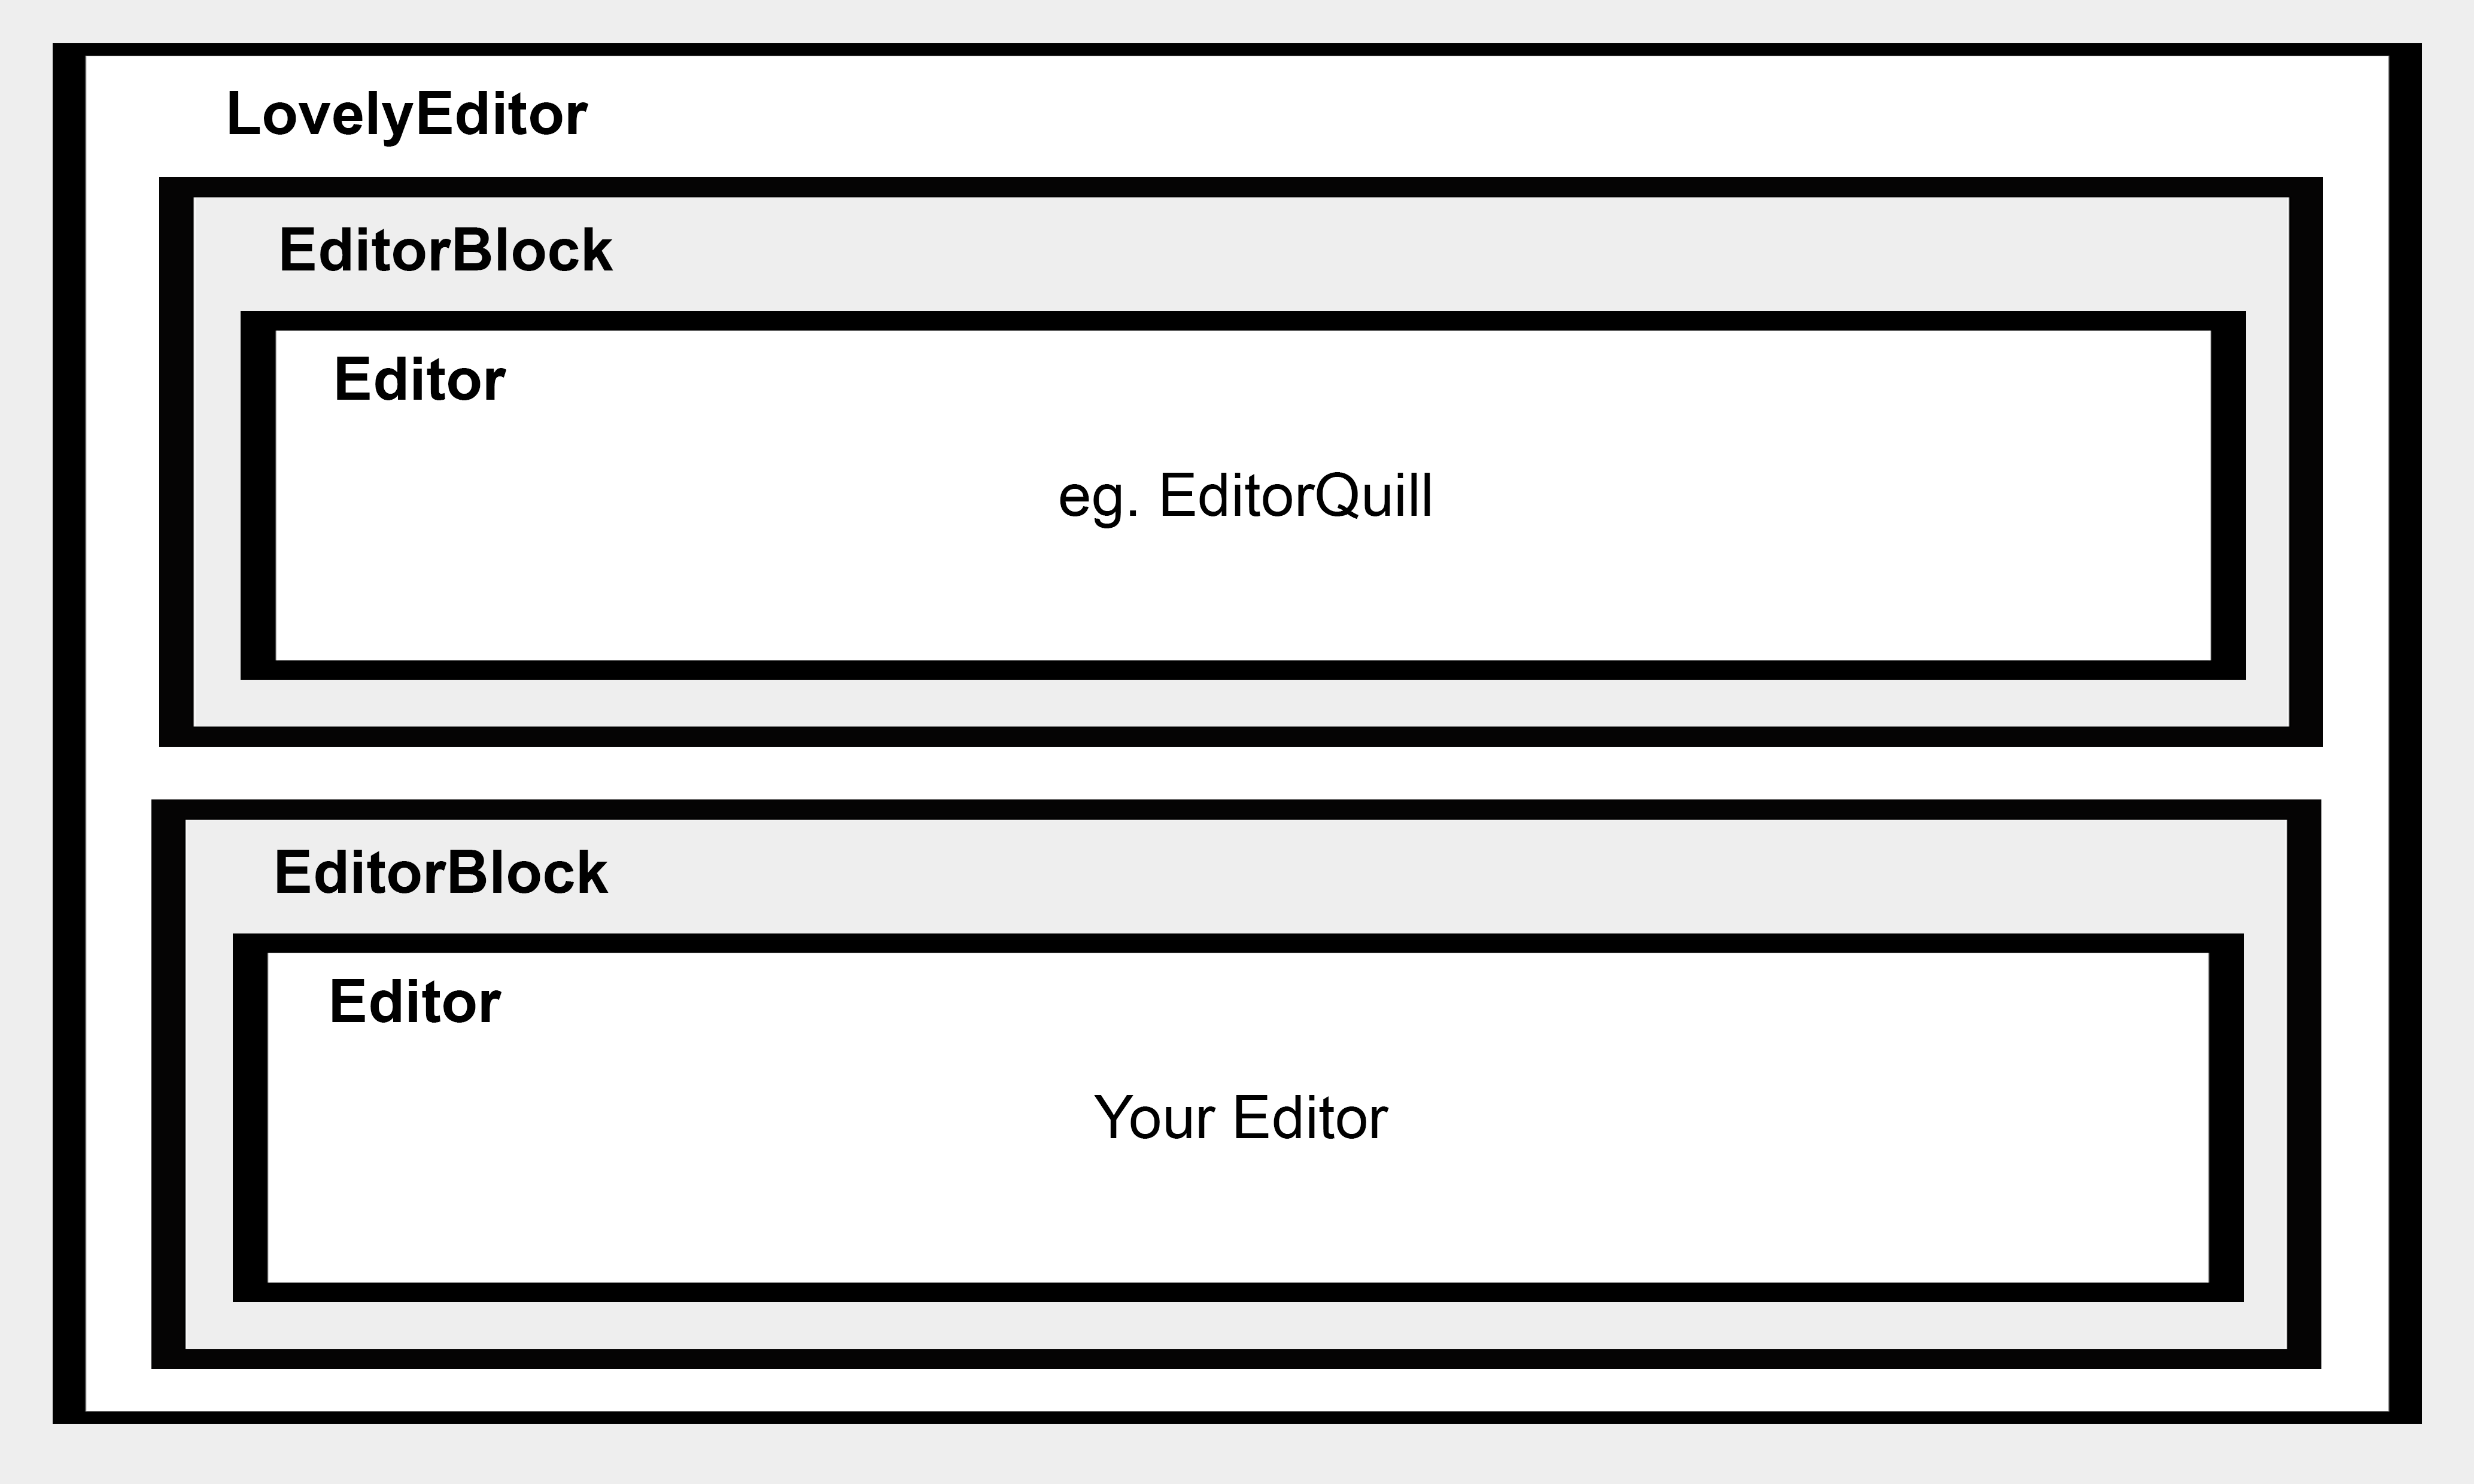 LovelyEditor Structure